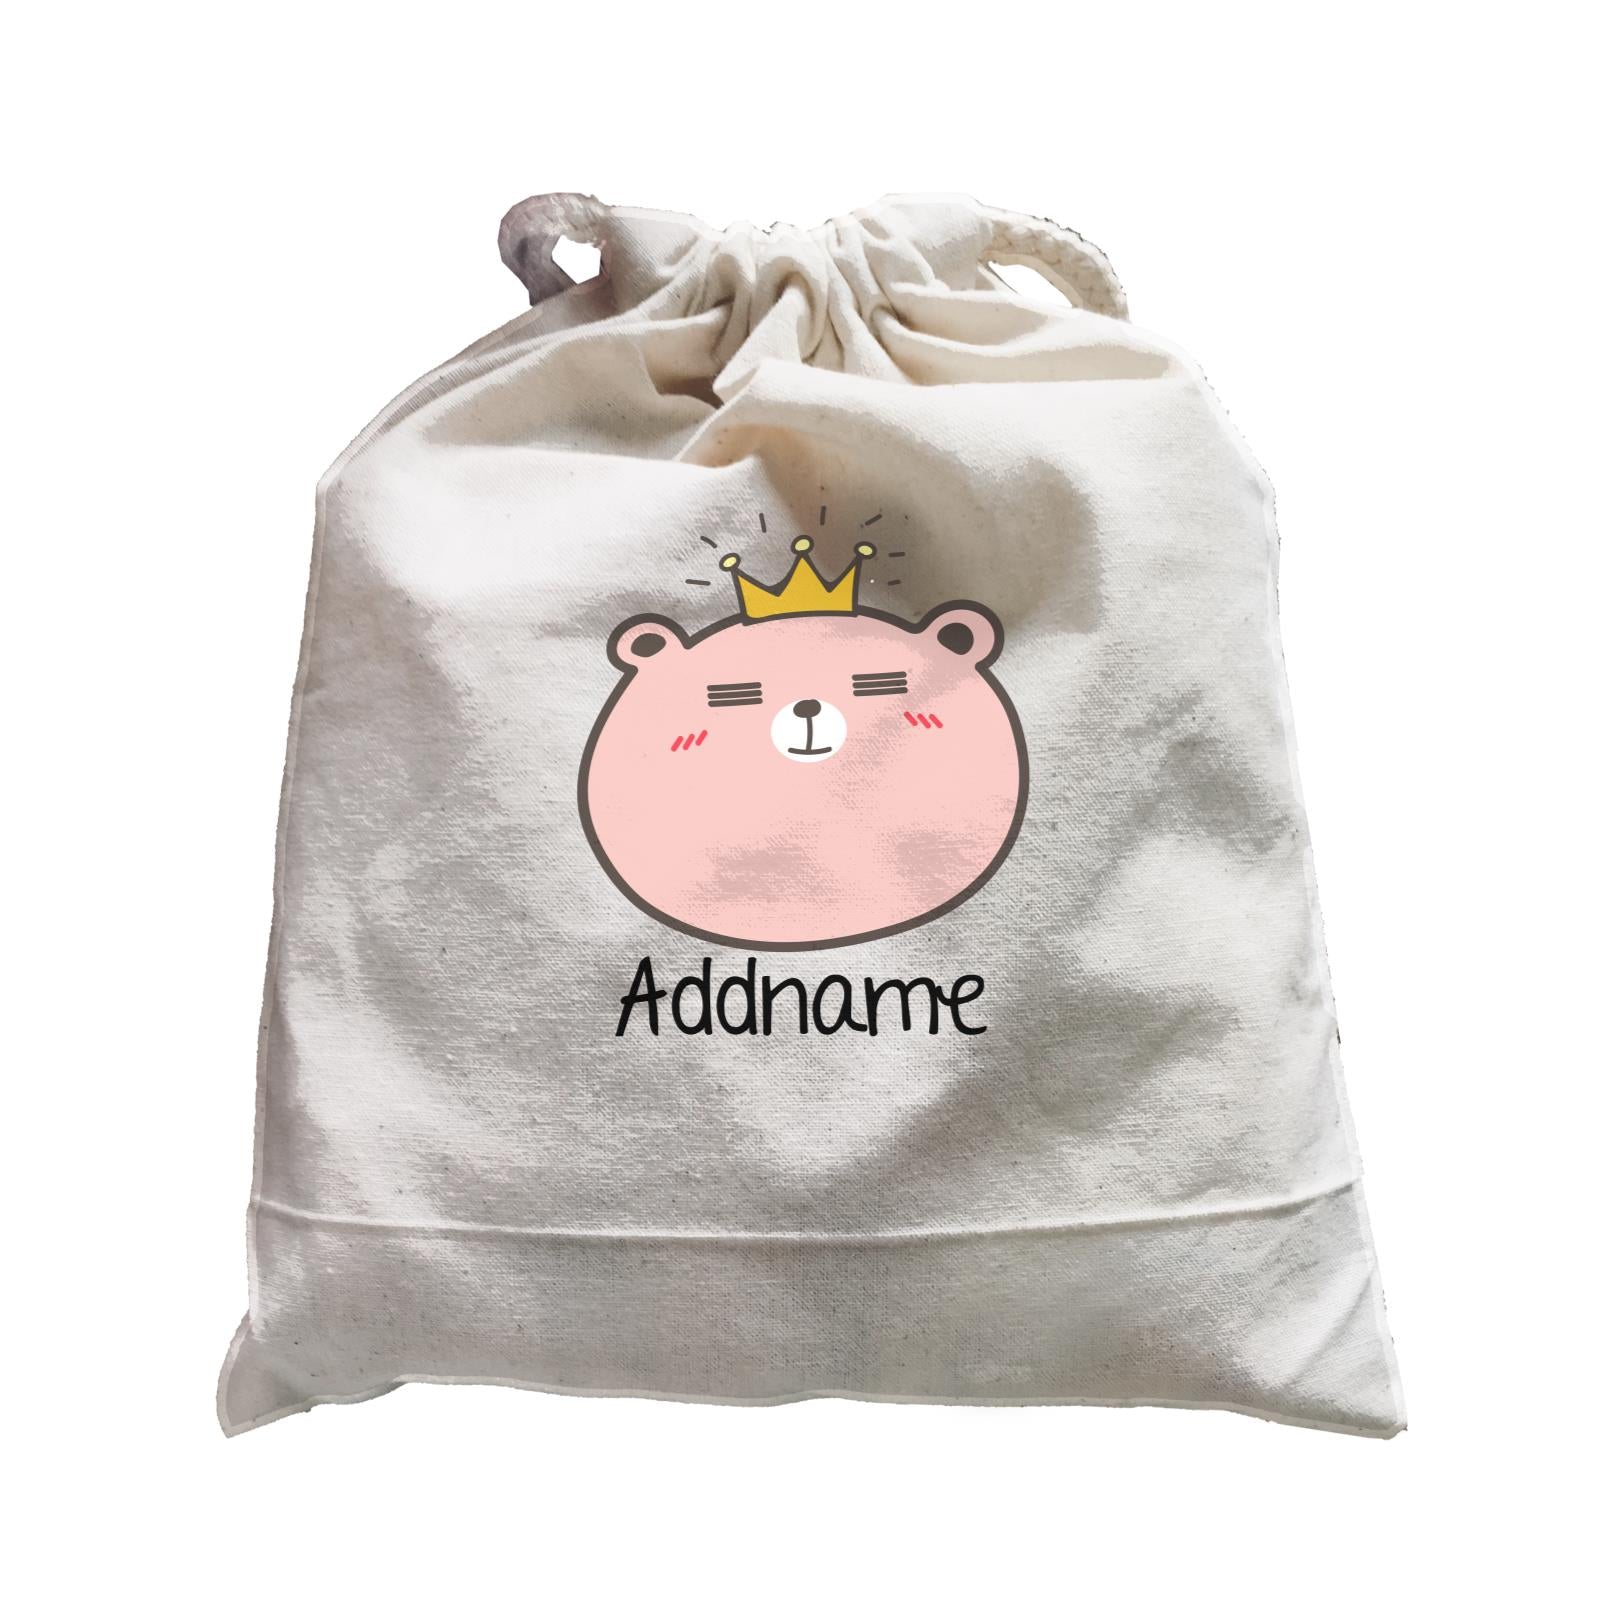 Cute Animals And Friends Series Cute Pink Bear With Crown Addname Satchel